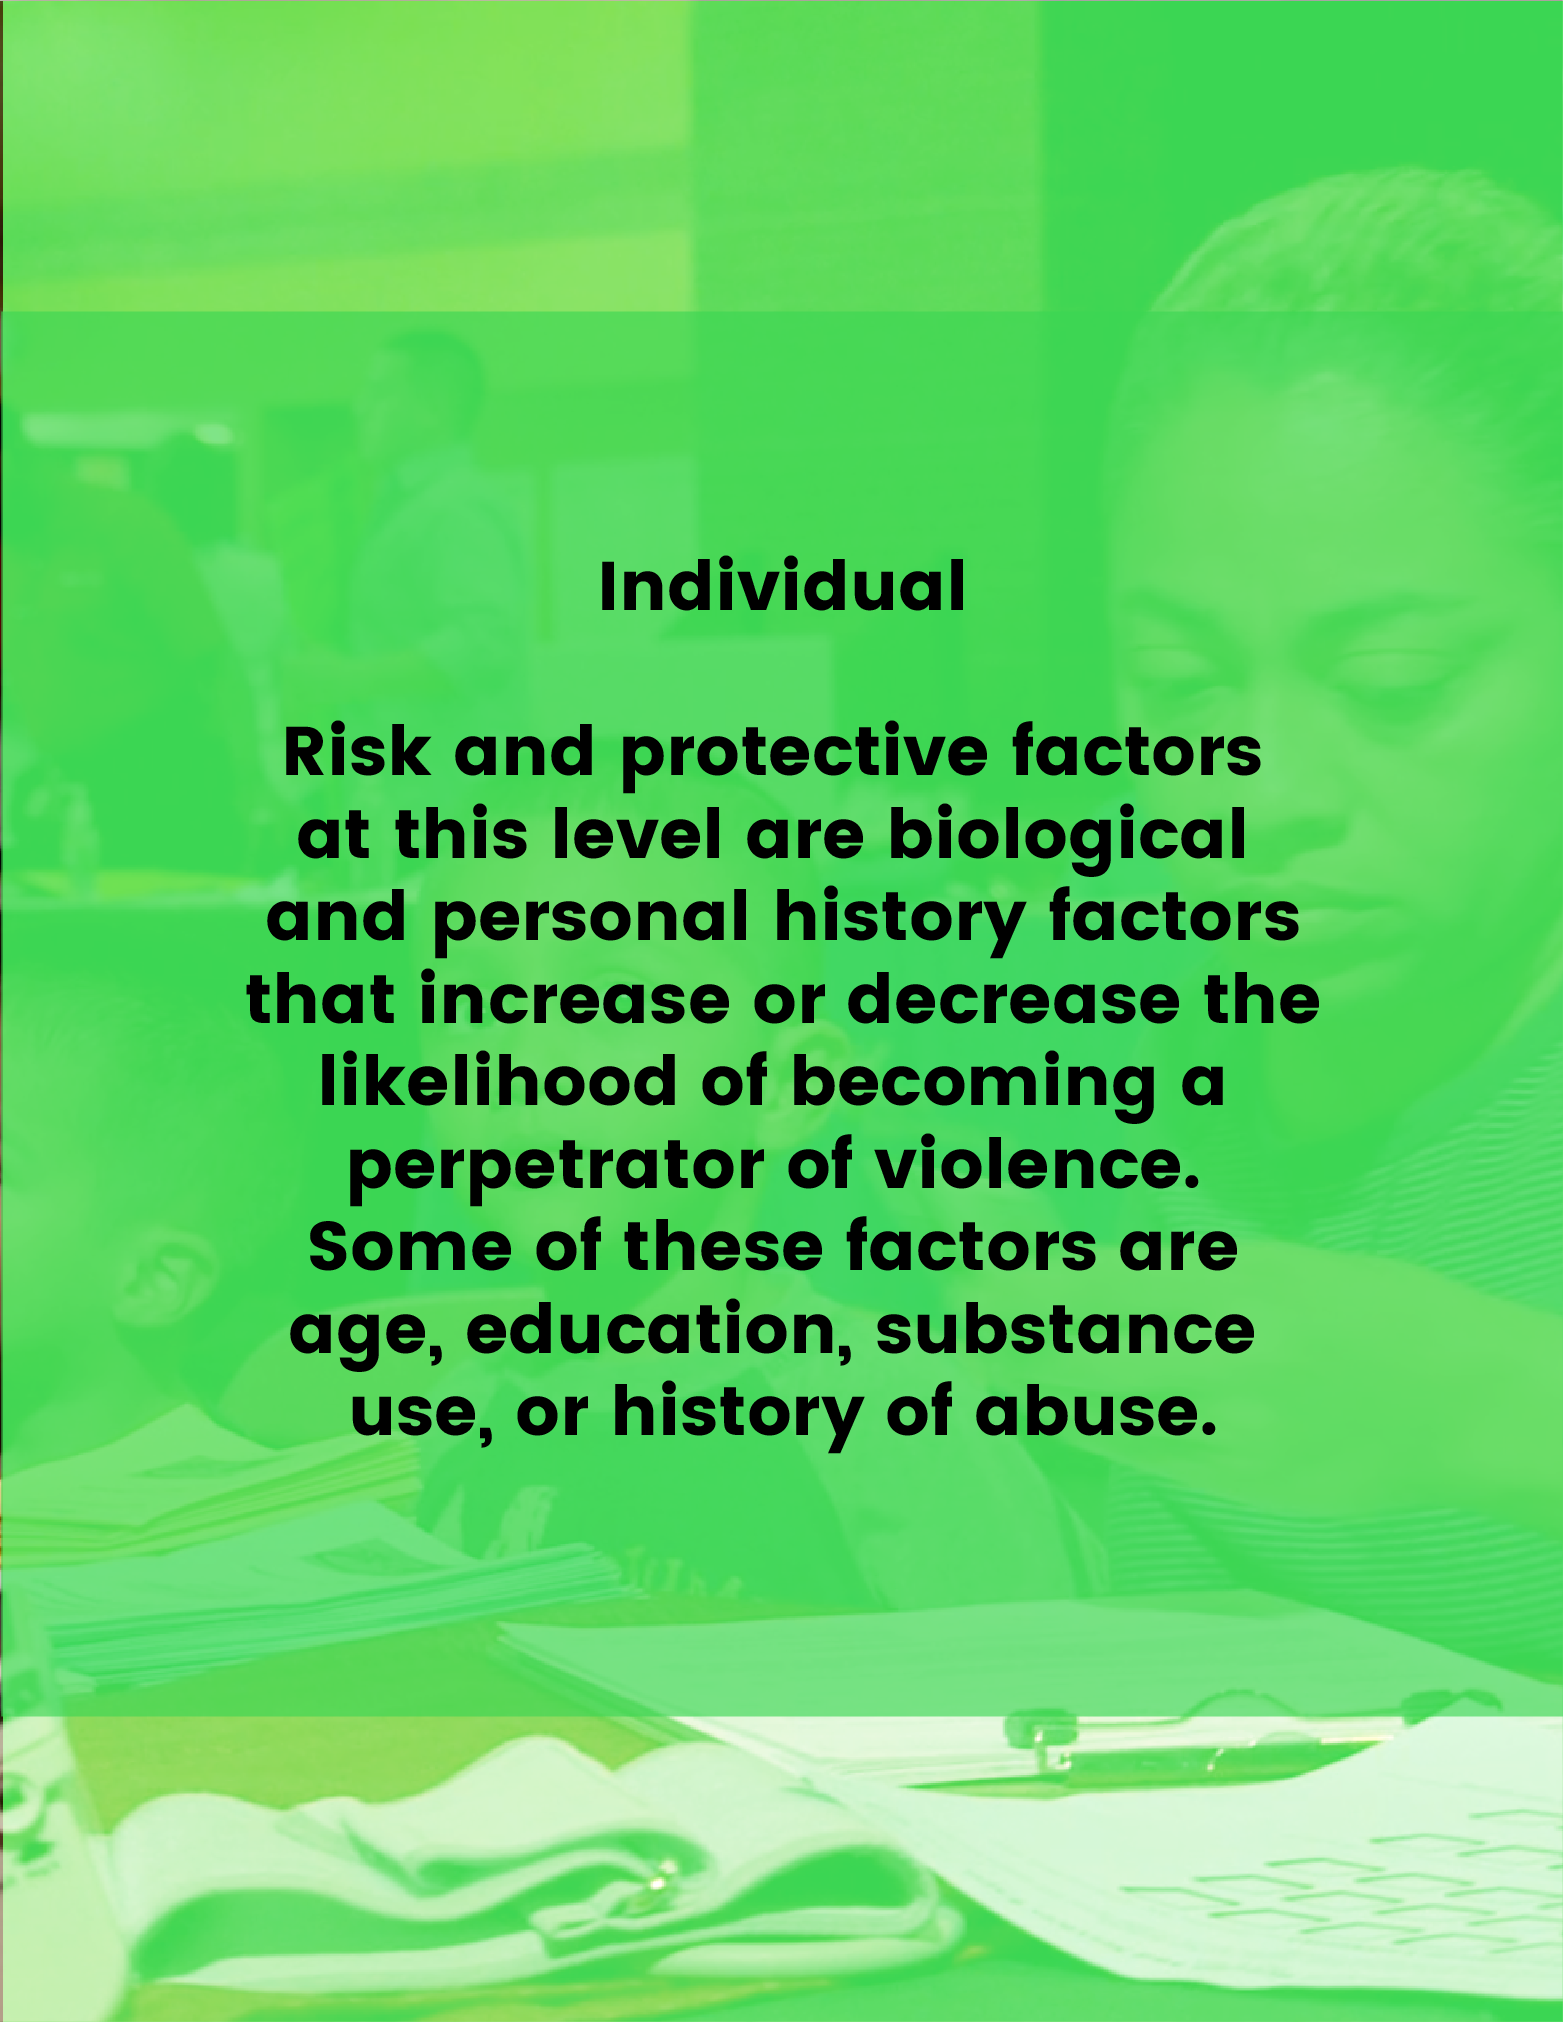 Individual - Risk and protective factors at this level are biological and personal history factors that increase or decrease the likelihood of becoming a perpetrator of violence. Some of these factors are age, education, substance use, or history of abuse.